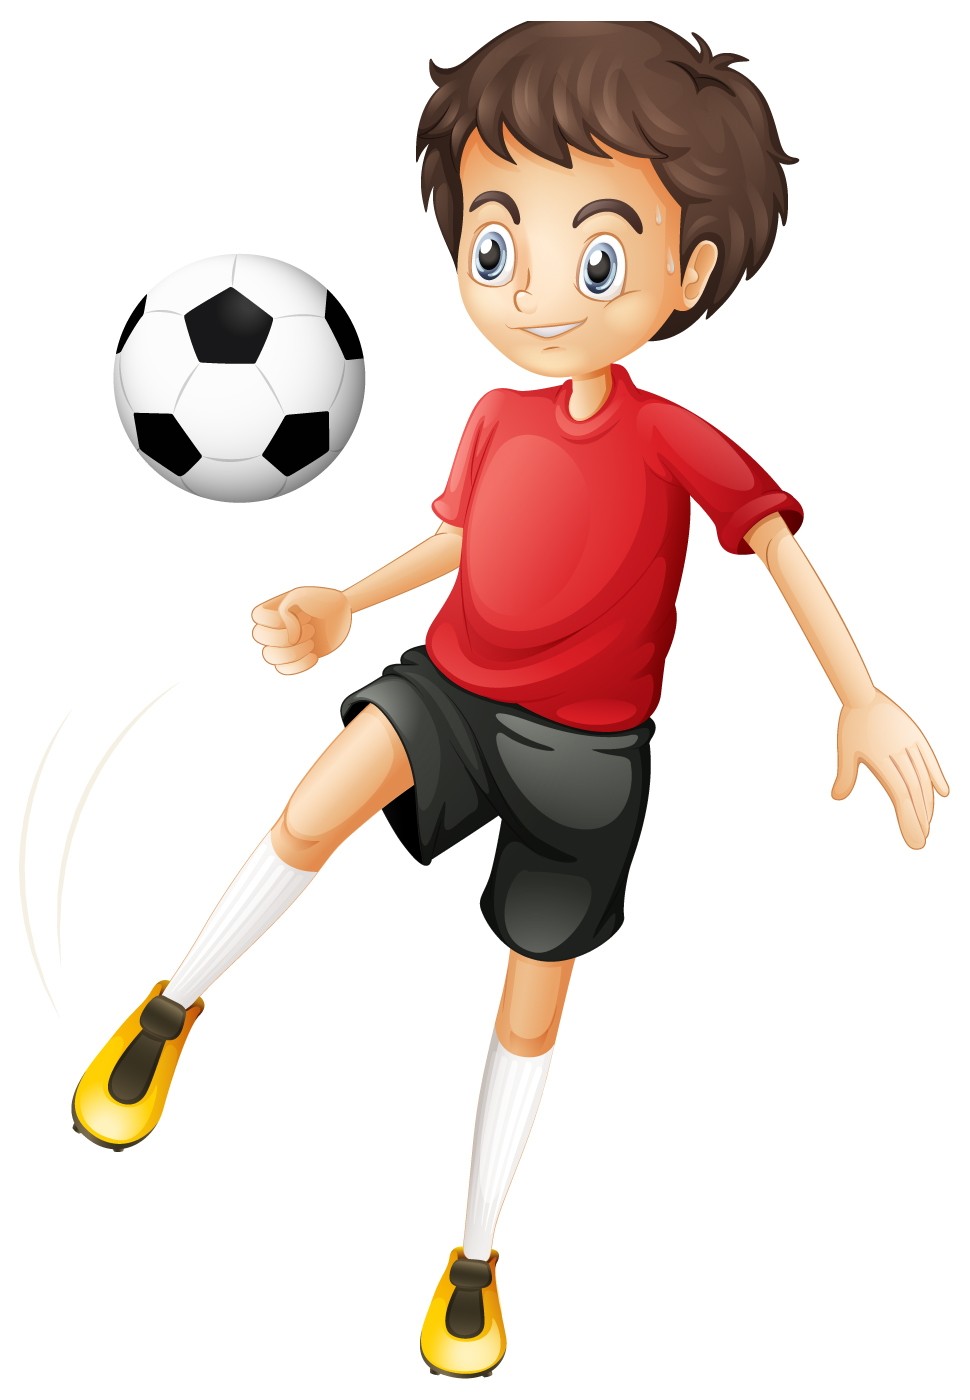 Kids playing, Soccer and Free cartoon images